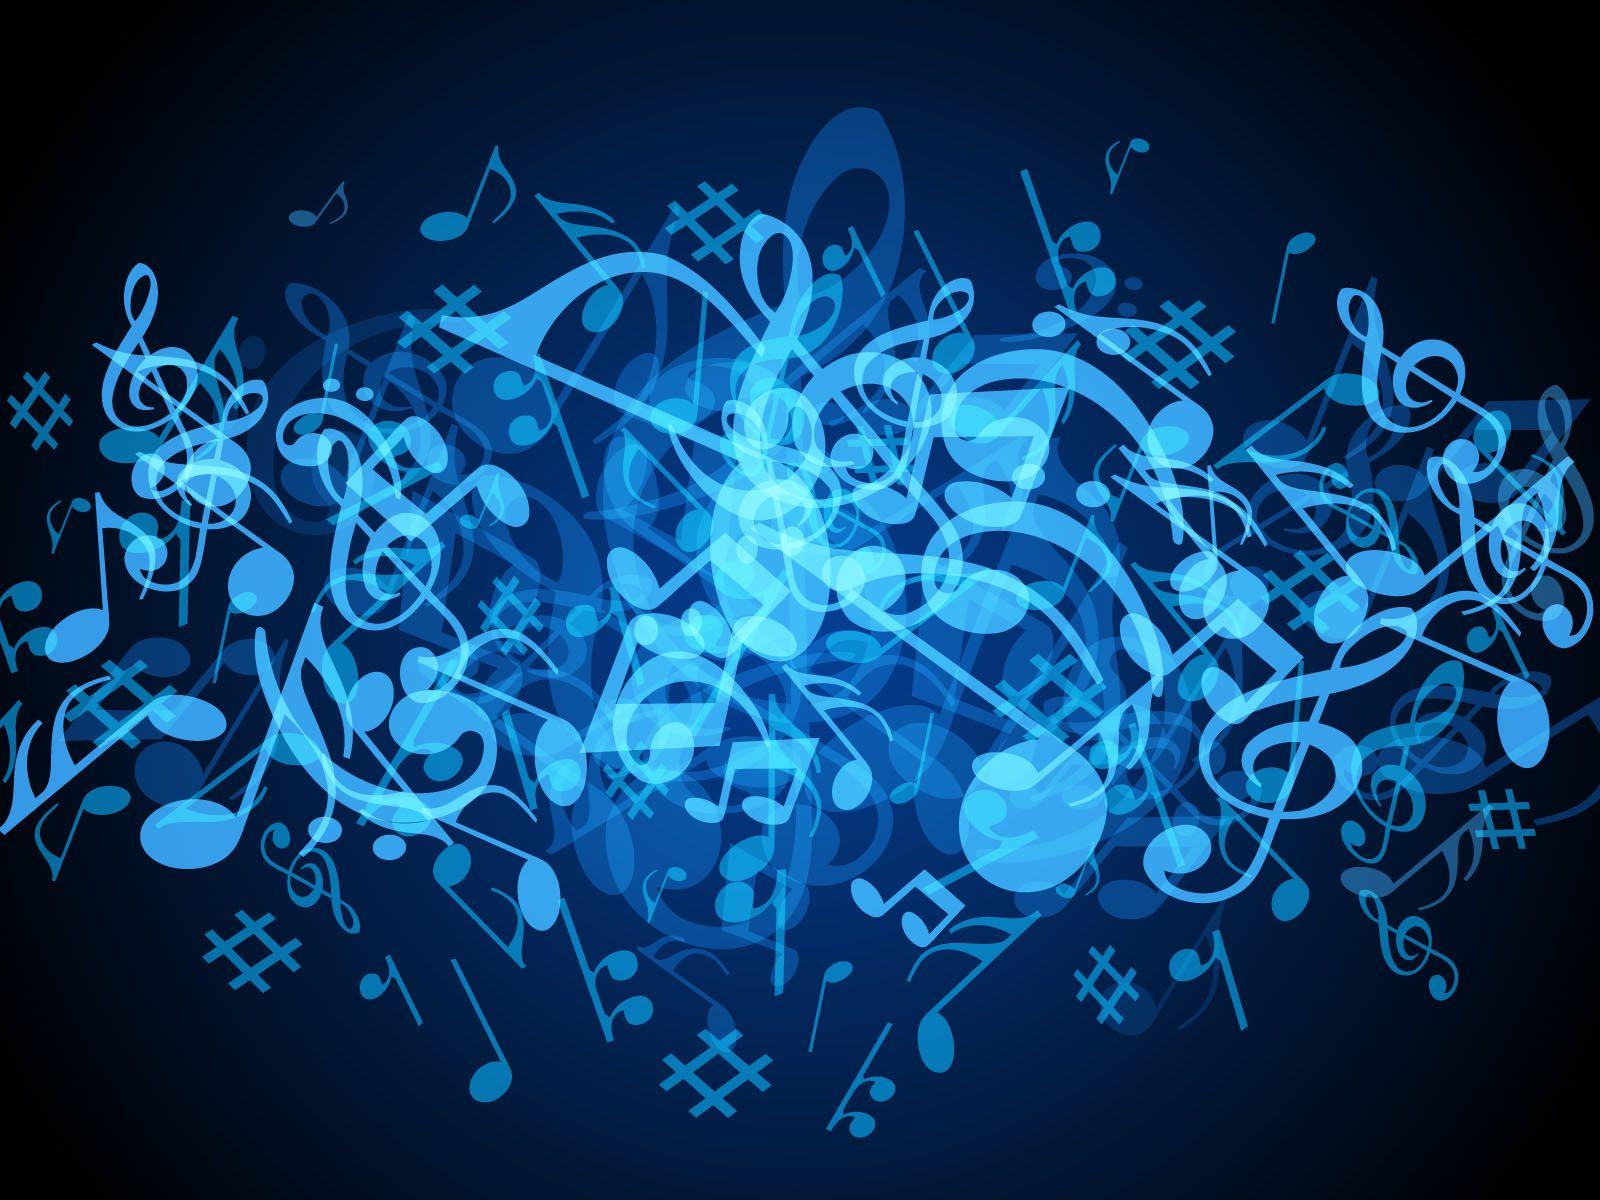 Blue Music Notes Background 23289 Hd Wallpaper. Ratby Cooperative